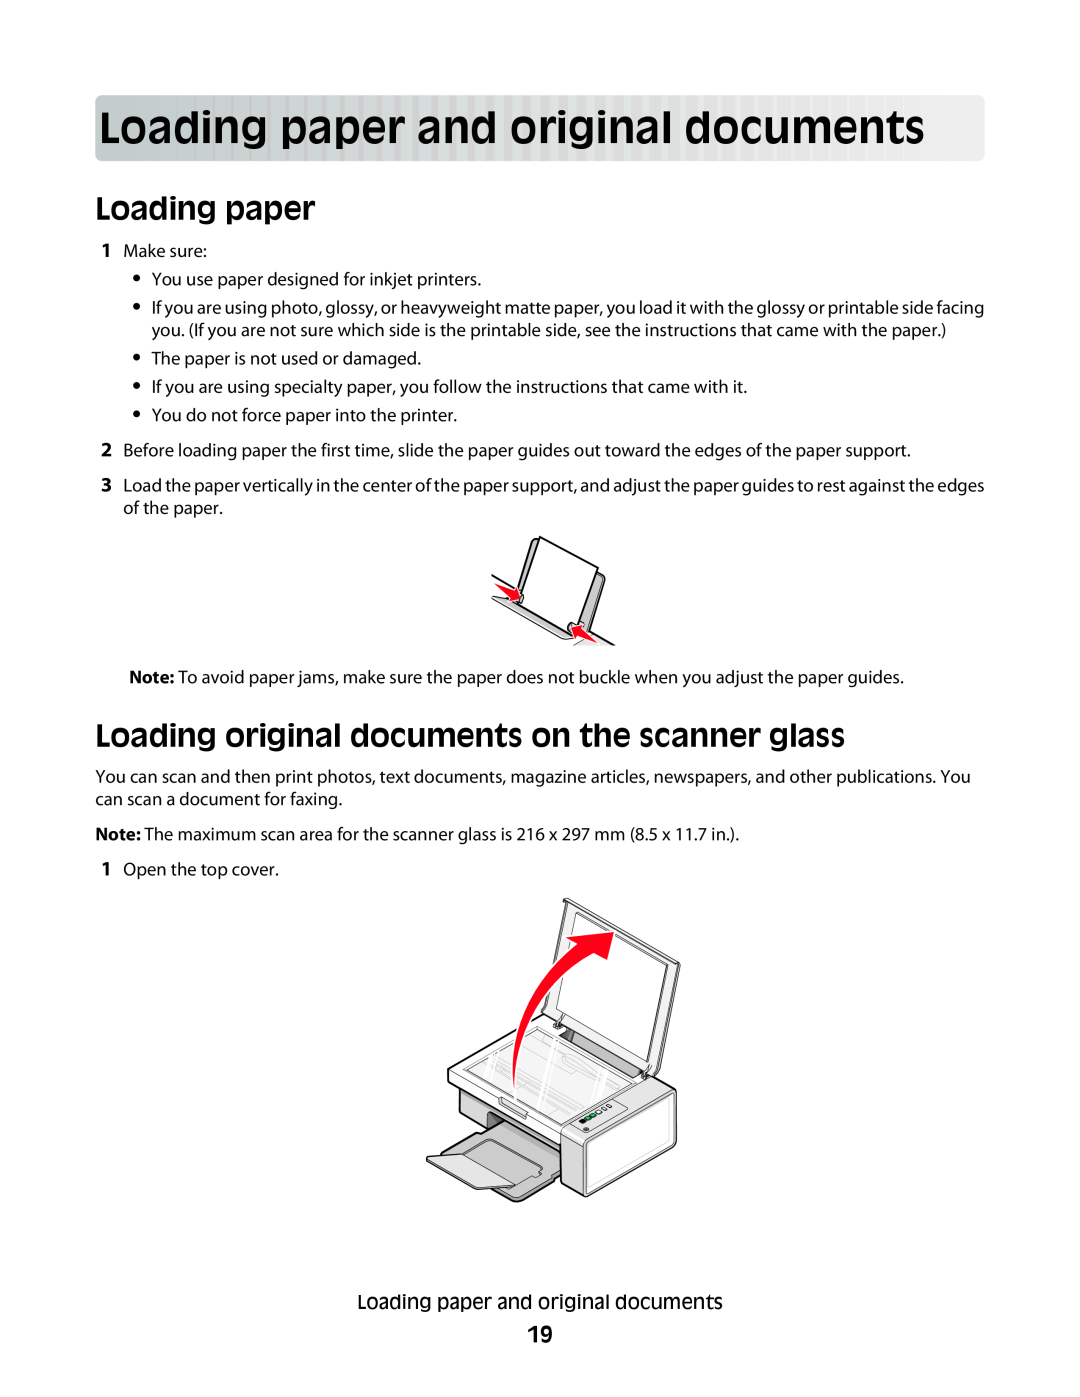 Lexmark 2500 Series manual Loadingpaperandoriginaldocuments, Loading paper, Loading original documents on the scanner glass 